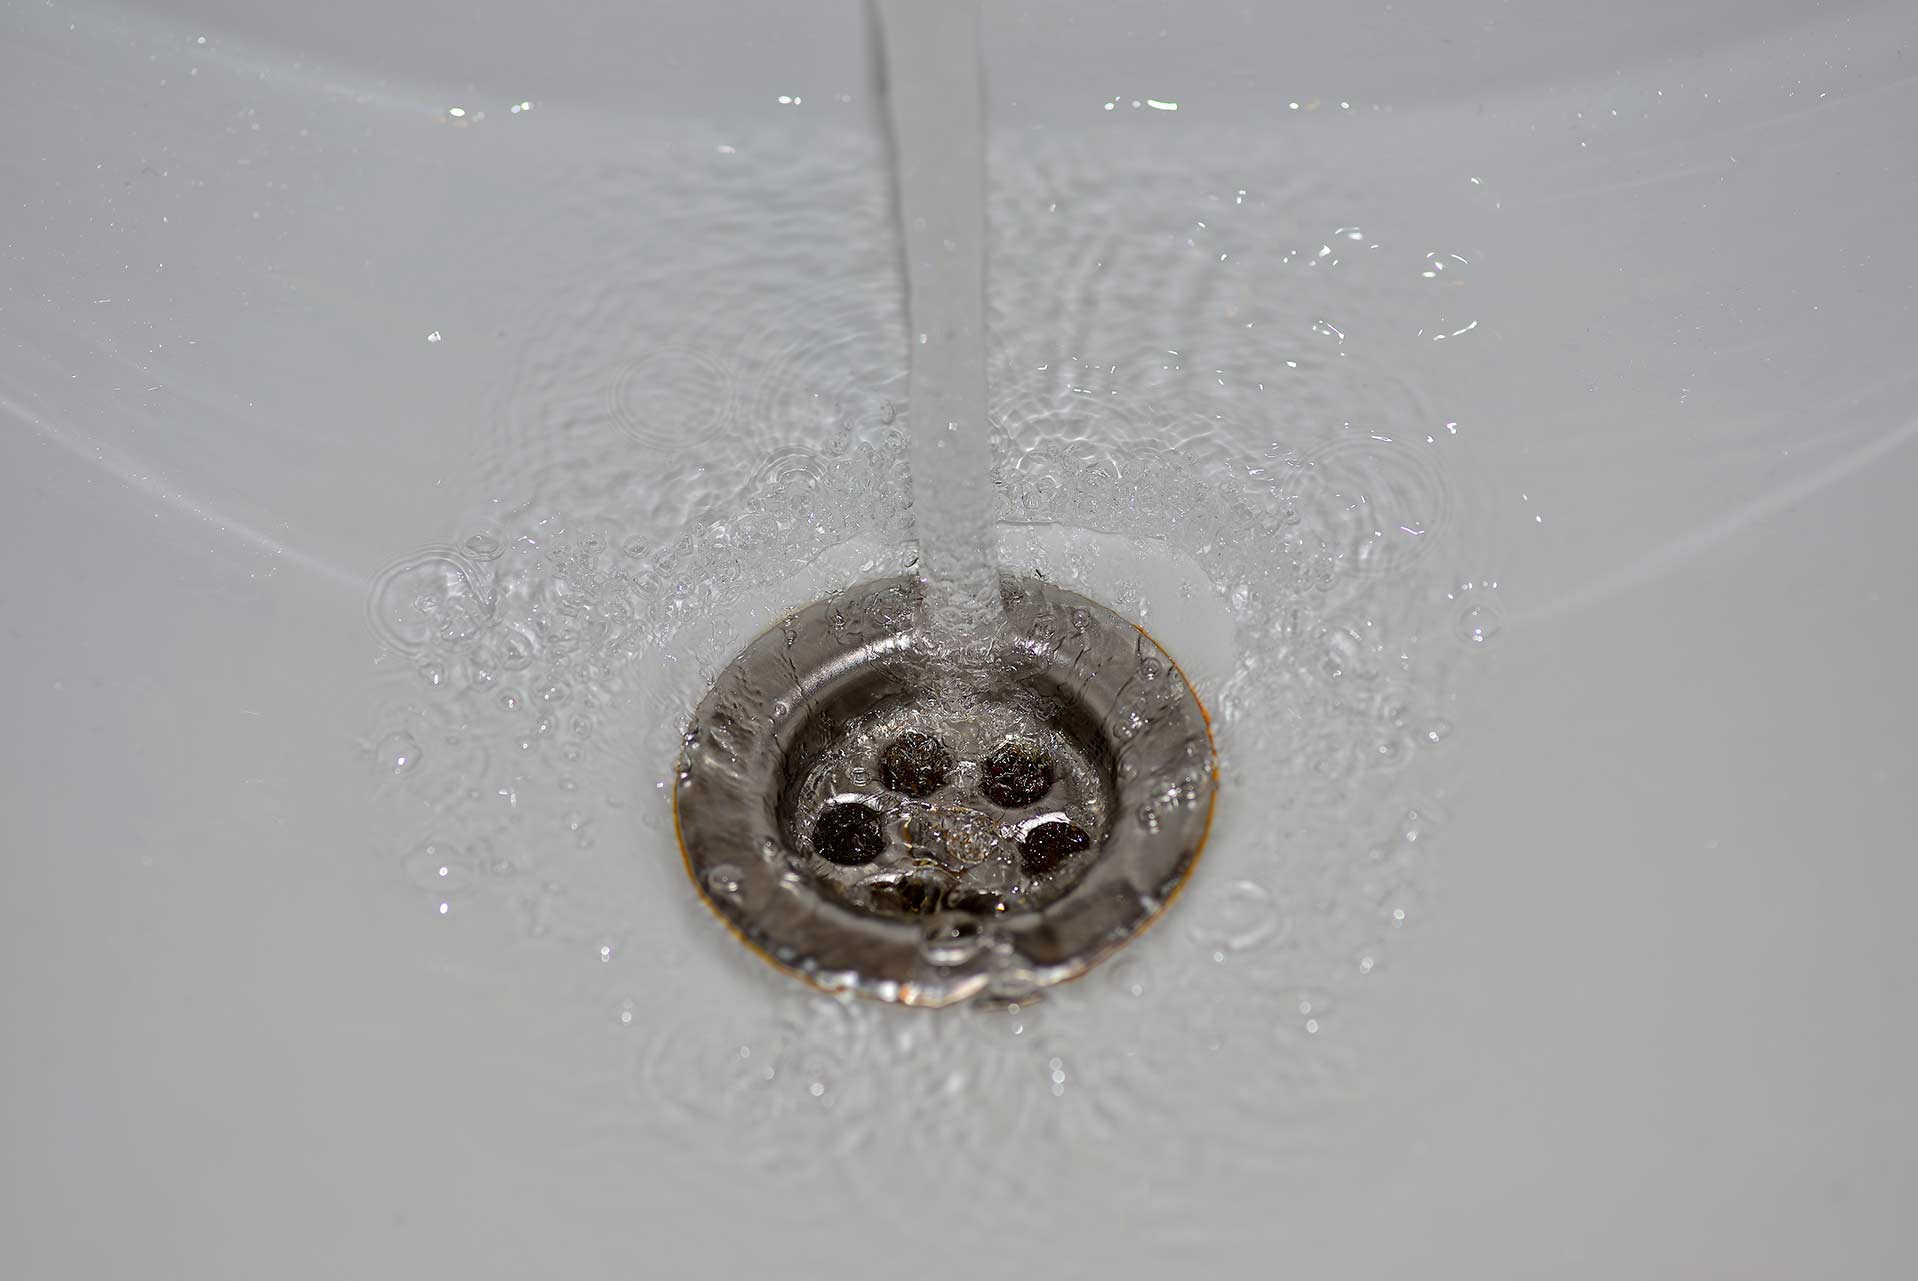 A2B Drains provides services to unblock blocked sinks and drains for properties in Melton Mowbray.